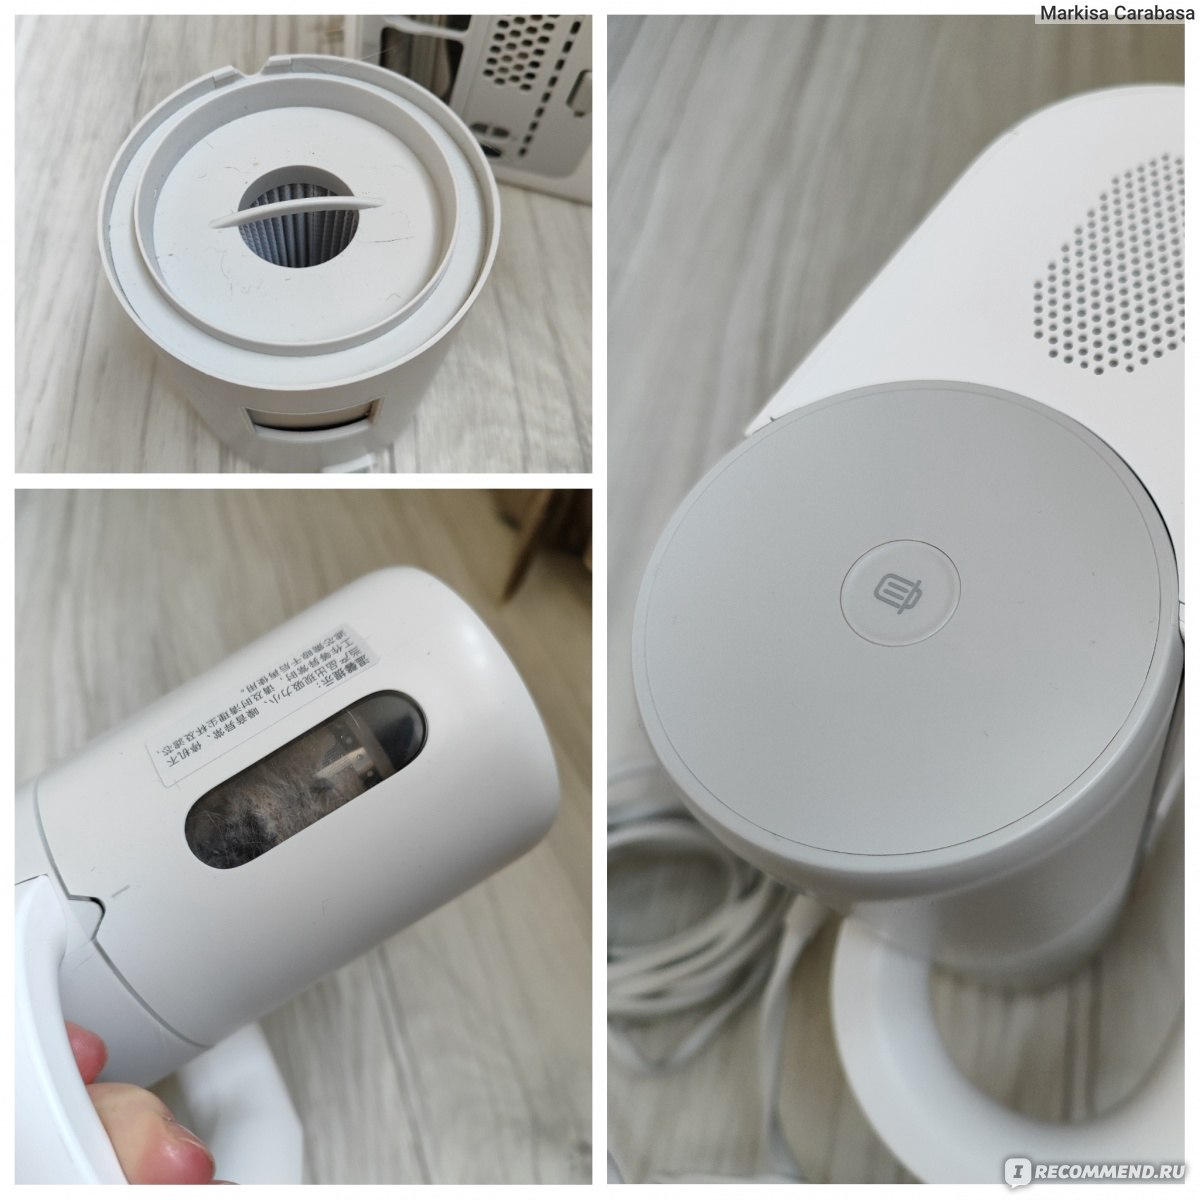 Mjcmy01dy dust mite vacuum cleaner. Пылесос Xiaomi (mjcmy01dy). Xiaomi Dust Mite Vacuum. Xiaomi Dust Mite Vacuum Cleaner mjcmy01dy лампочка. Xiaomi Mijia Dust Mite Vacuum Cleaner.